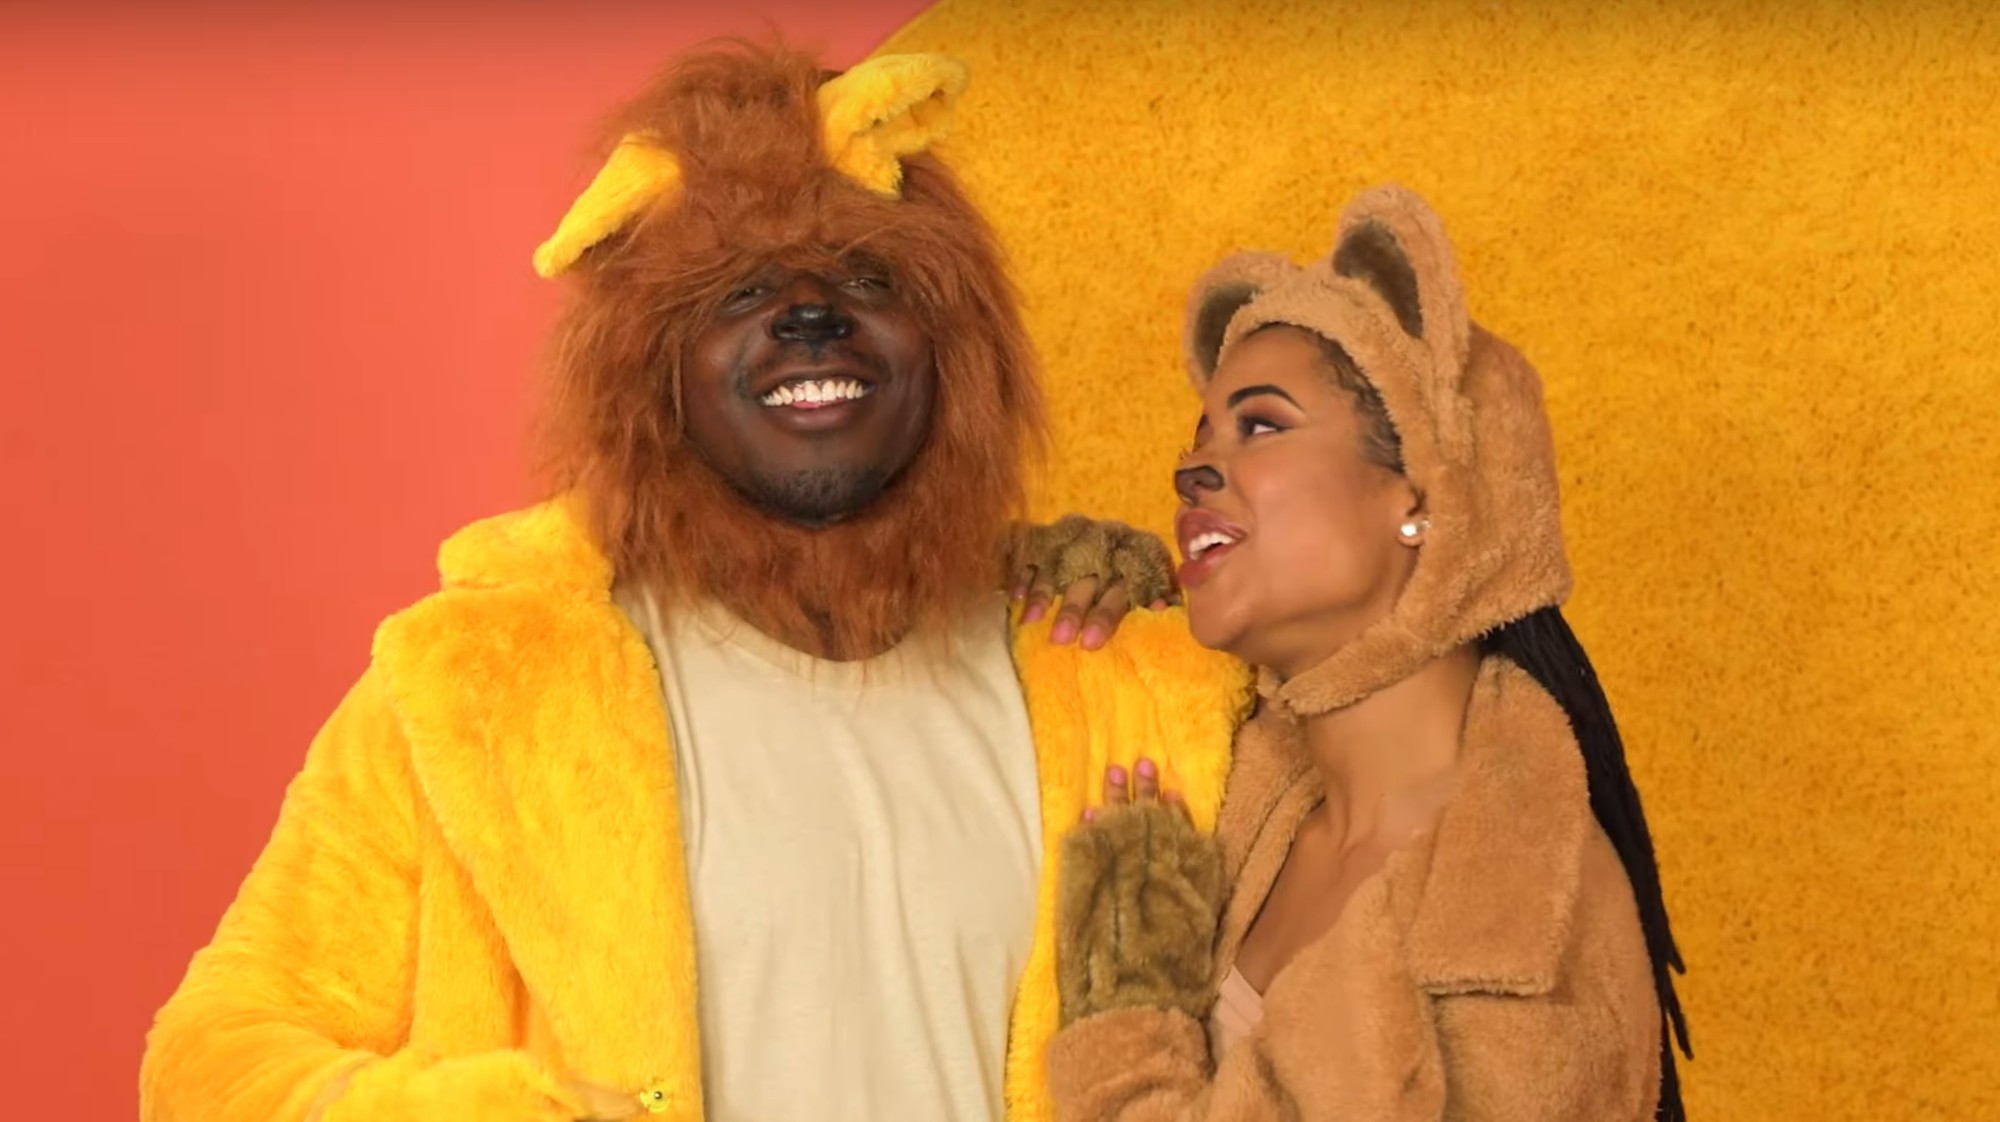 Timon Lion King Gay Porn - A 'Lion King' Porn Parody Exists and We Can Feel the Love - VICE